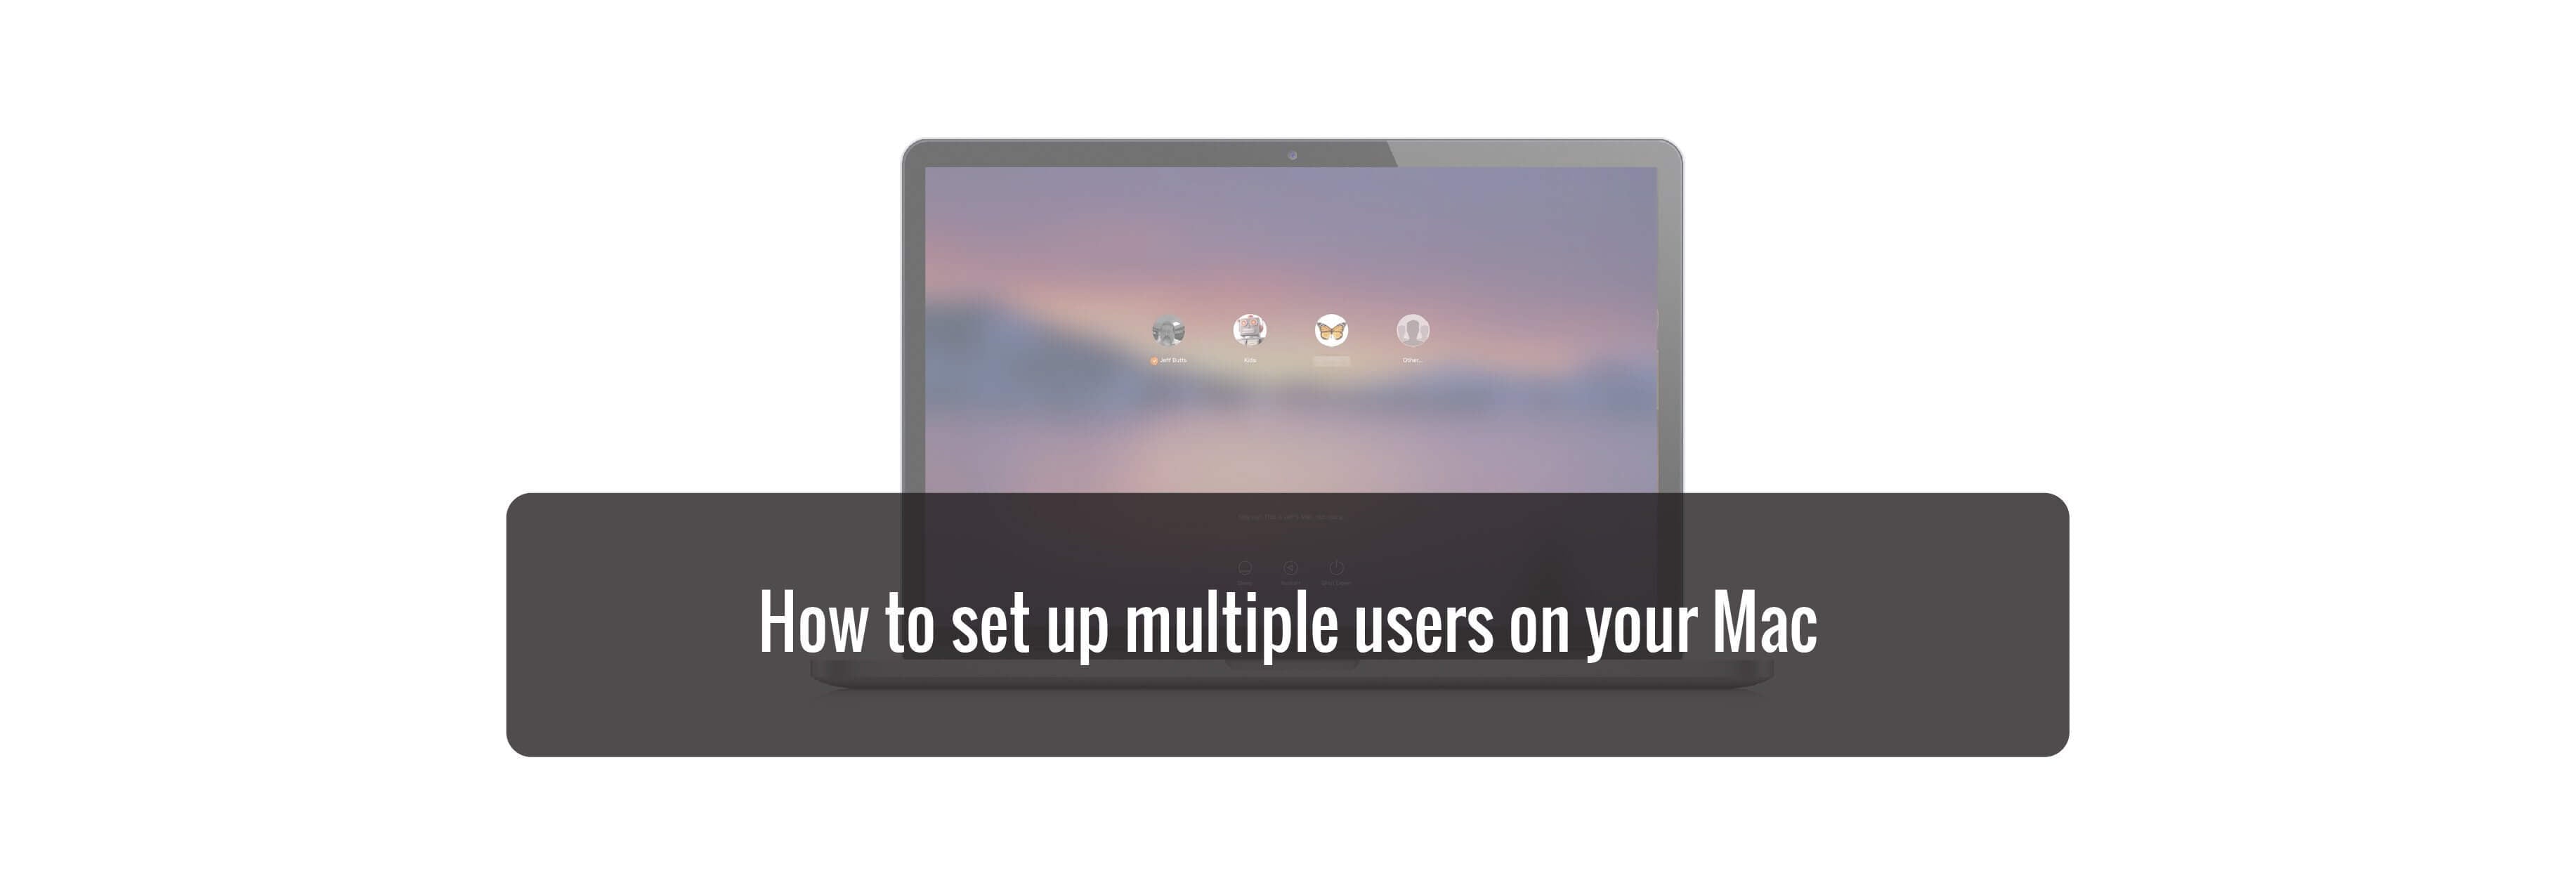 How to set up multiple users on your Mac